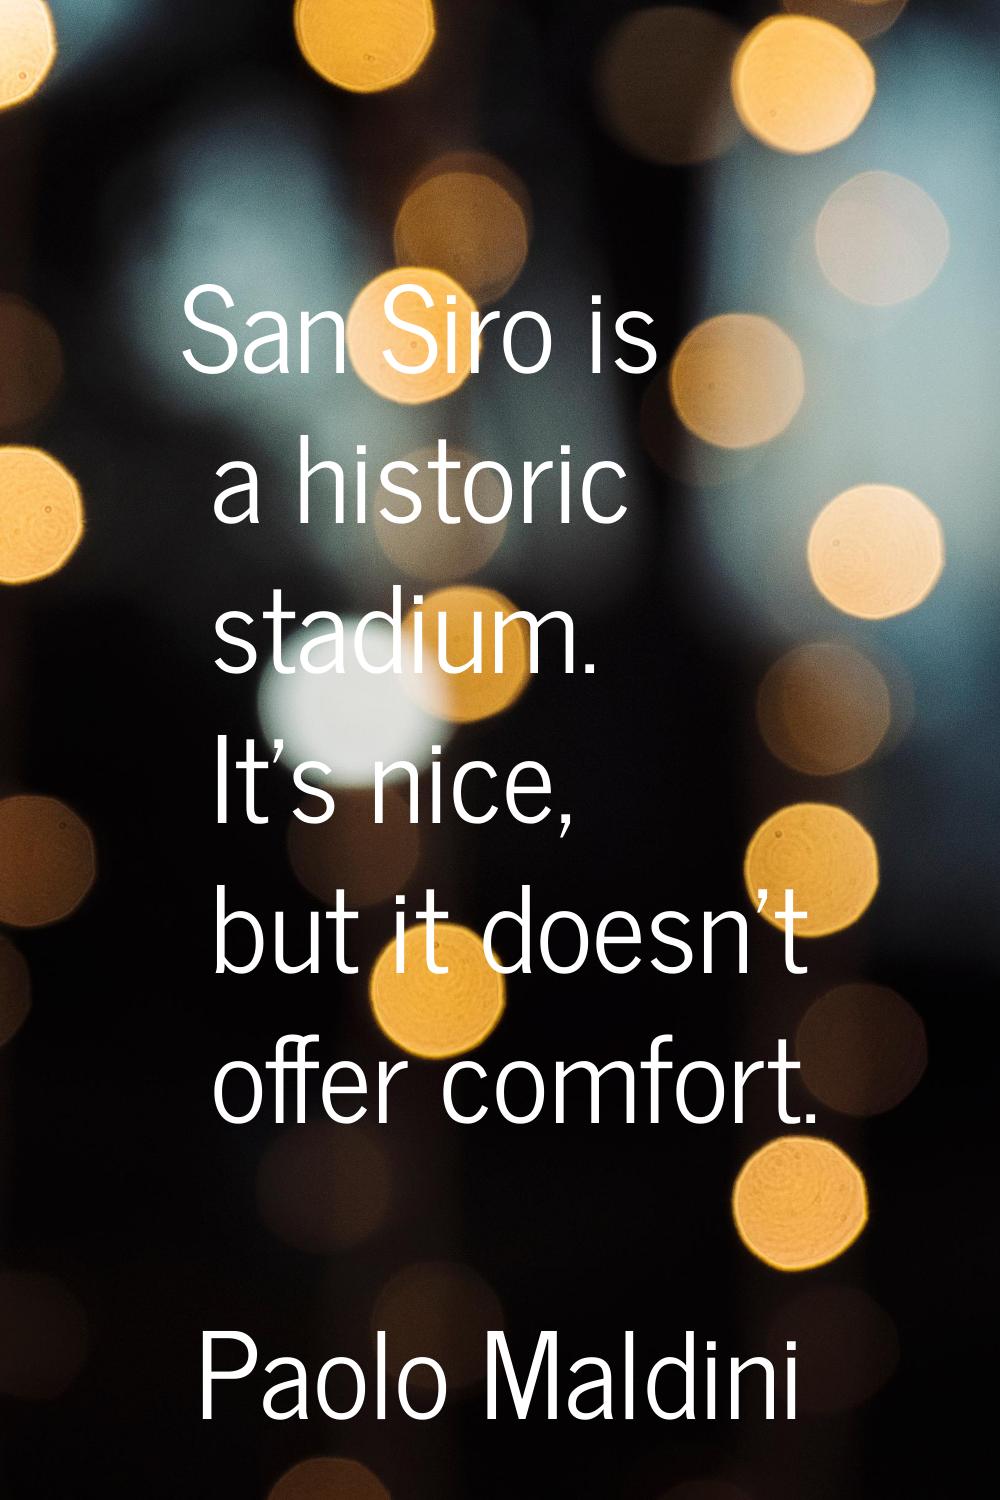 San Siro is a historic stadium. It's nice, but it doesn't offer comfort.